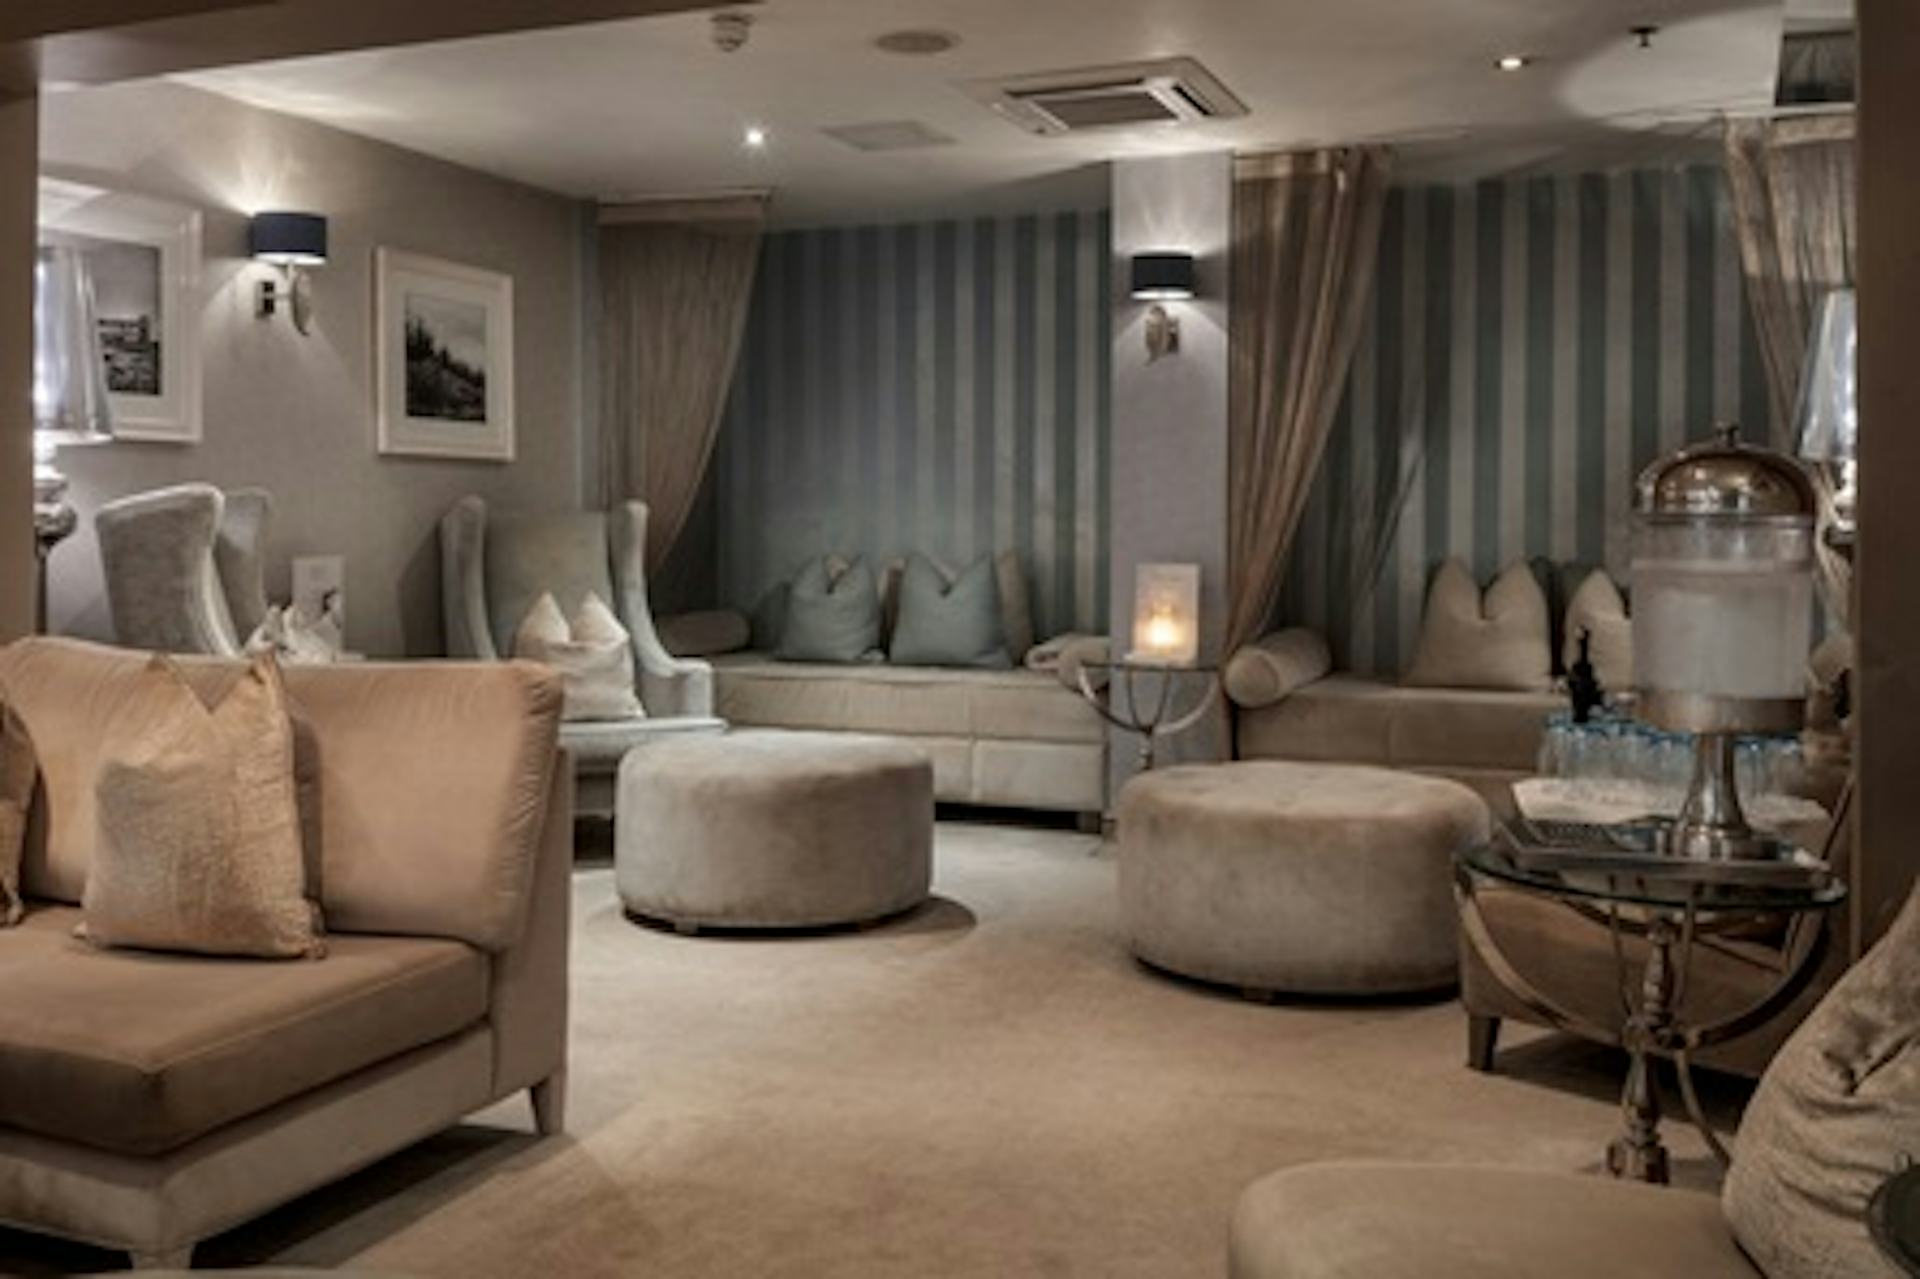 Weekend Serenity Spa Day with Treatment, Lunch and Fizz at the 4* Slaley Hall Hotel